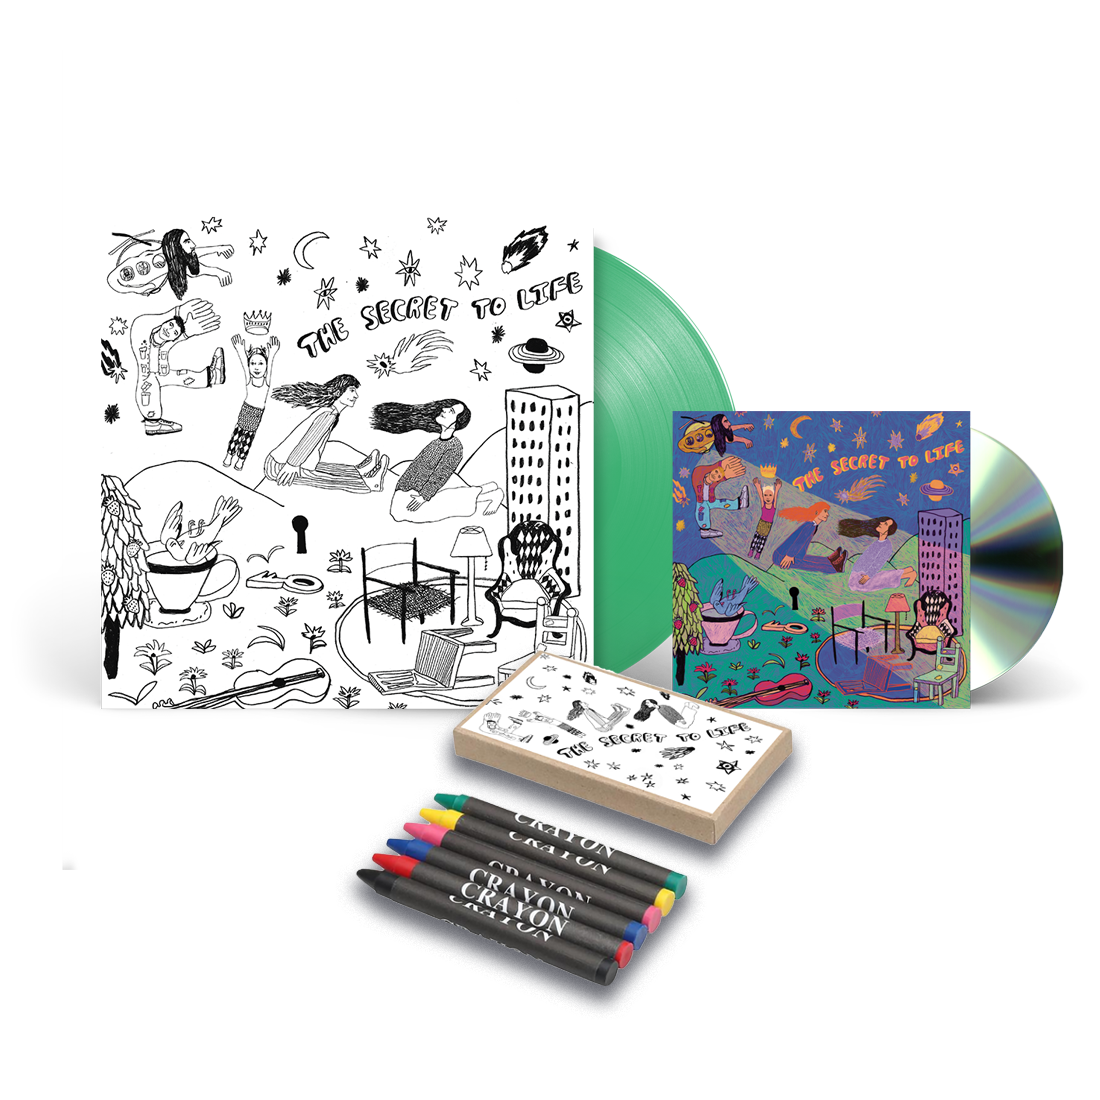 The Secret to Life CD, Exclusive "Colour in" LP + crayons!